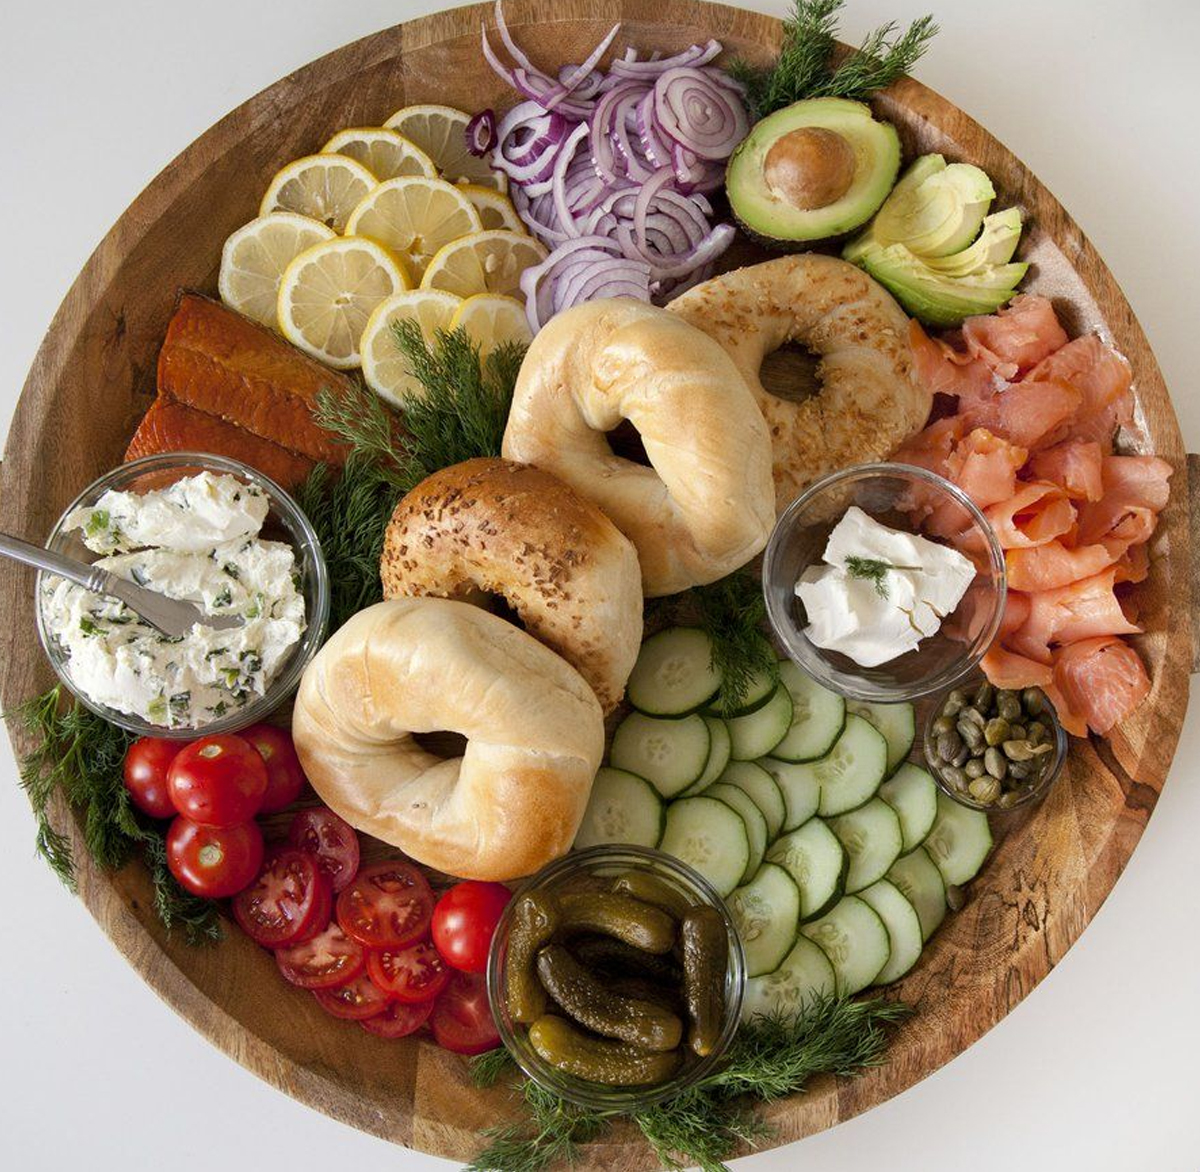 urban cookery includes a variety of bagels, spreads, and toppings like onion, avocado, salmon, and more. 